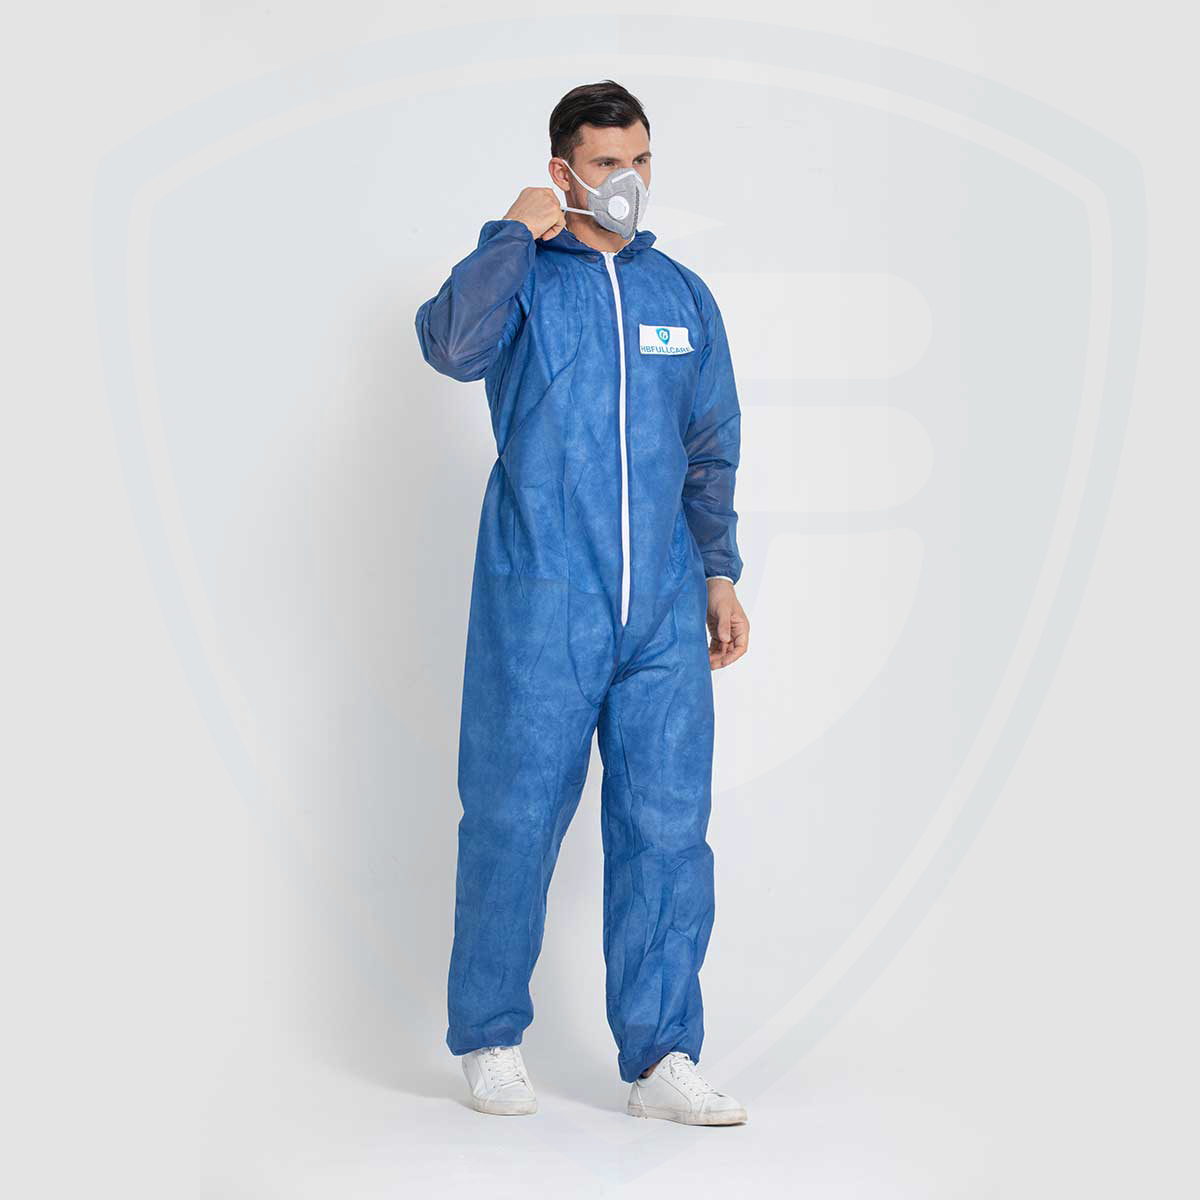 Breathable Disposable Safety Polypropylene Non-Woven Coverall Blue suit